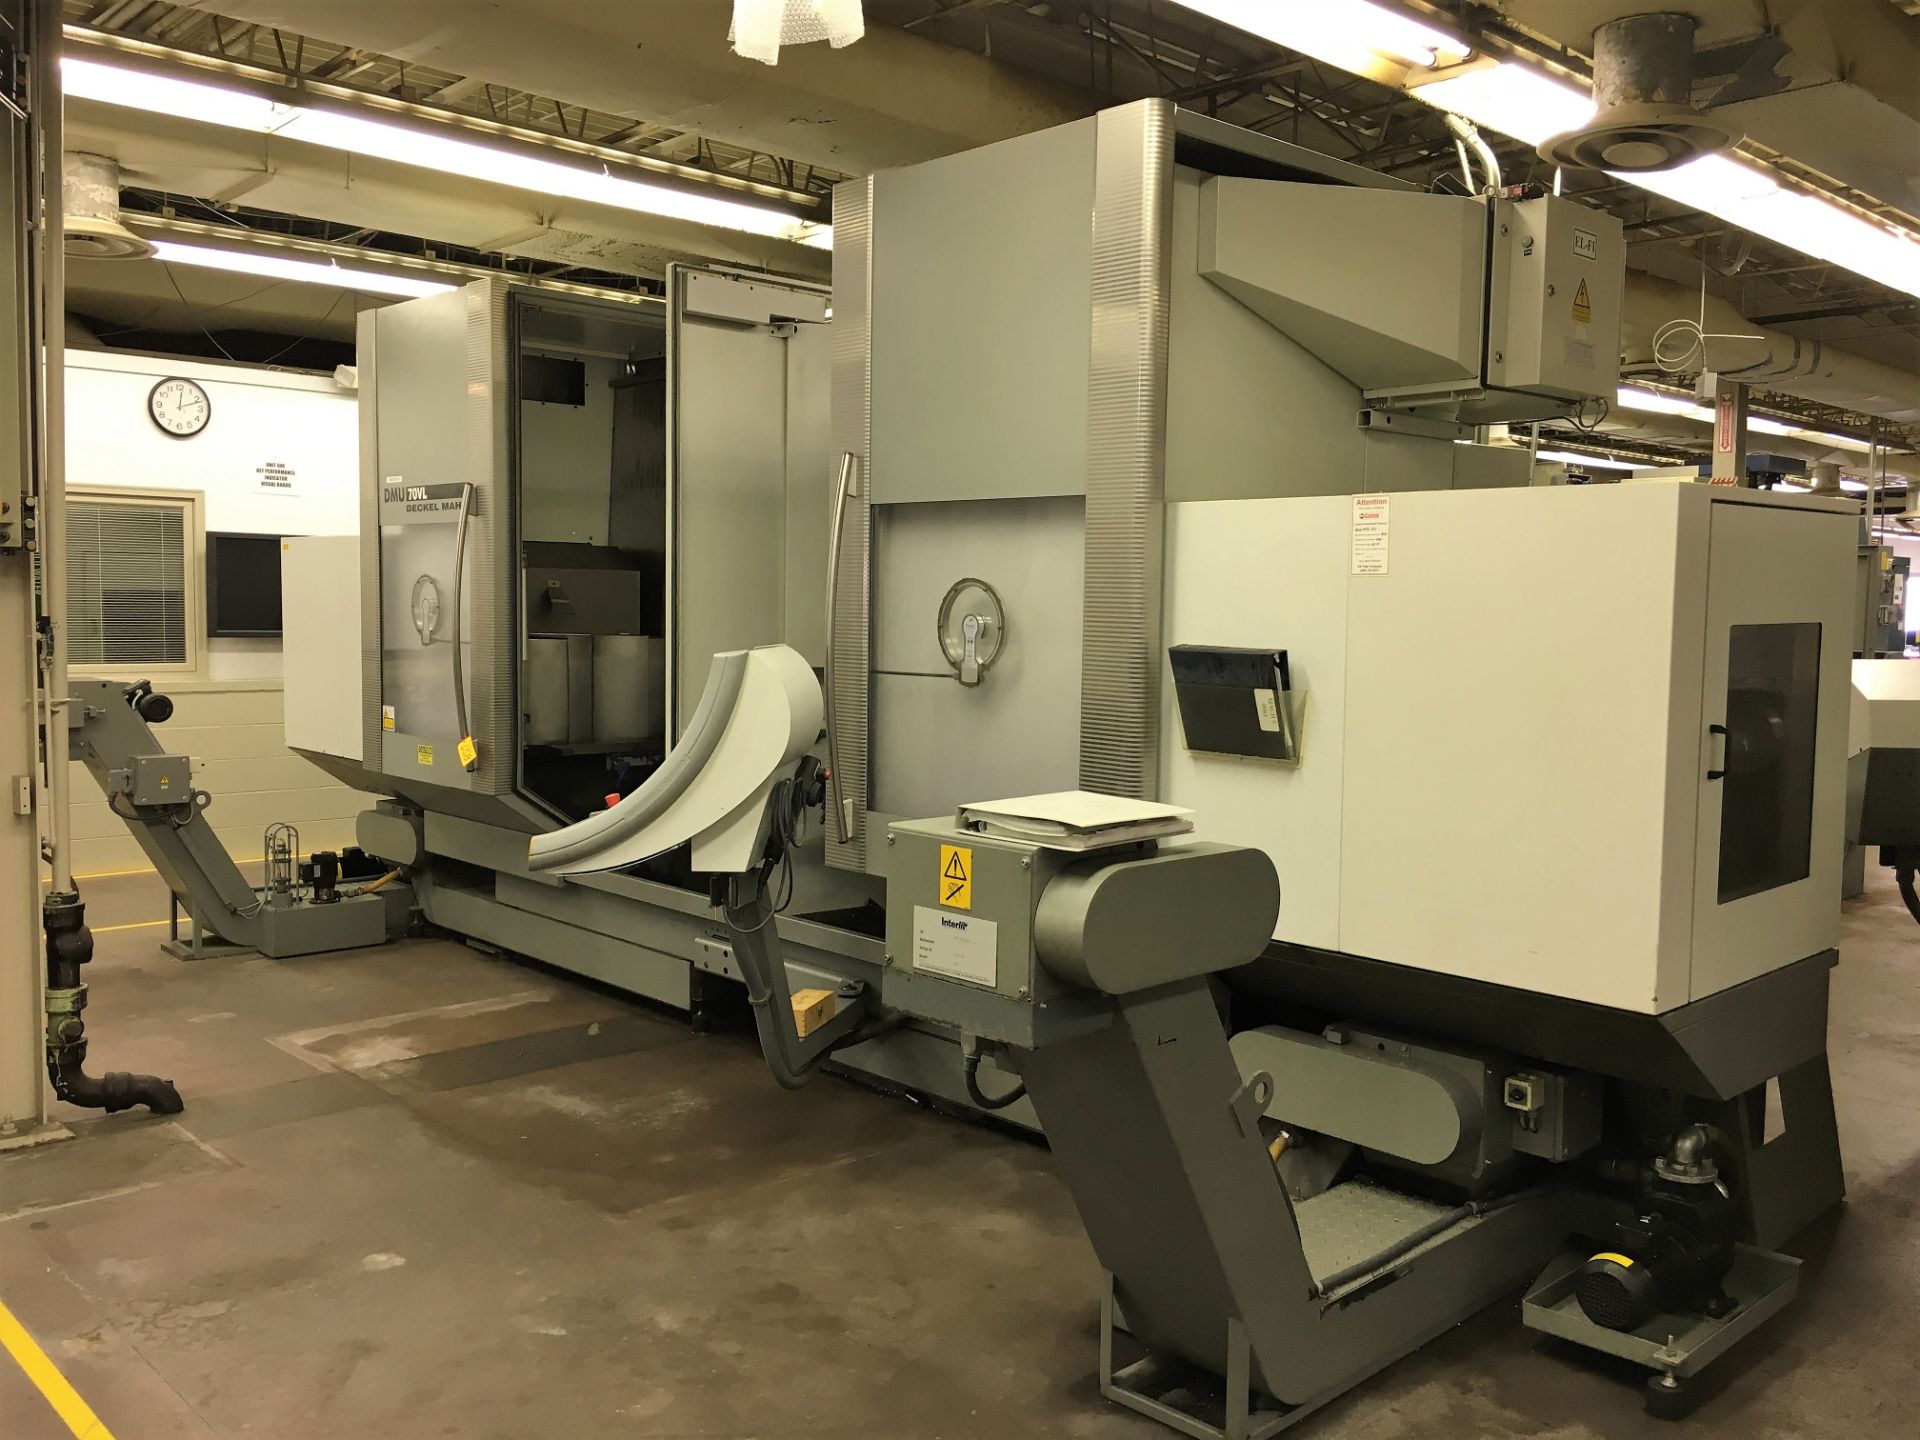 DECKEL-MAHO # DMU-70-VL ''FULL-5-AXIS'' CNC ''TWIN-CNC ROTARY TABLE'' VERTICAL MACHINING CENTER WITH - Image 5 of 6